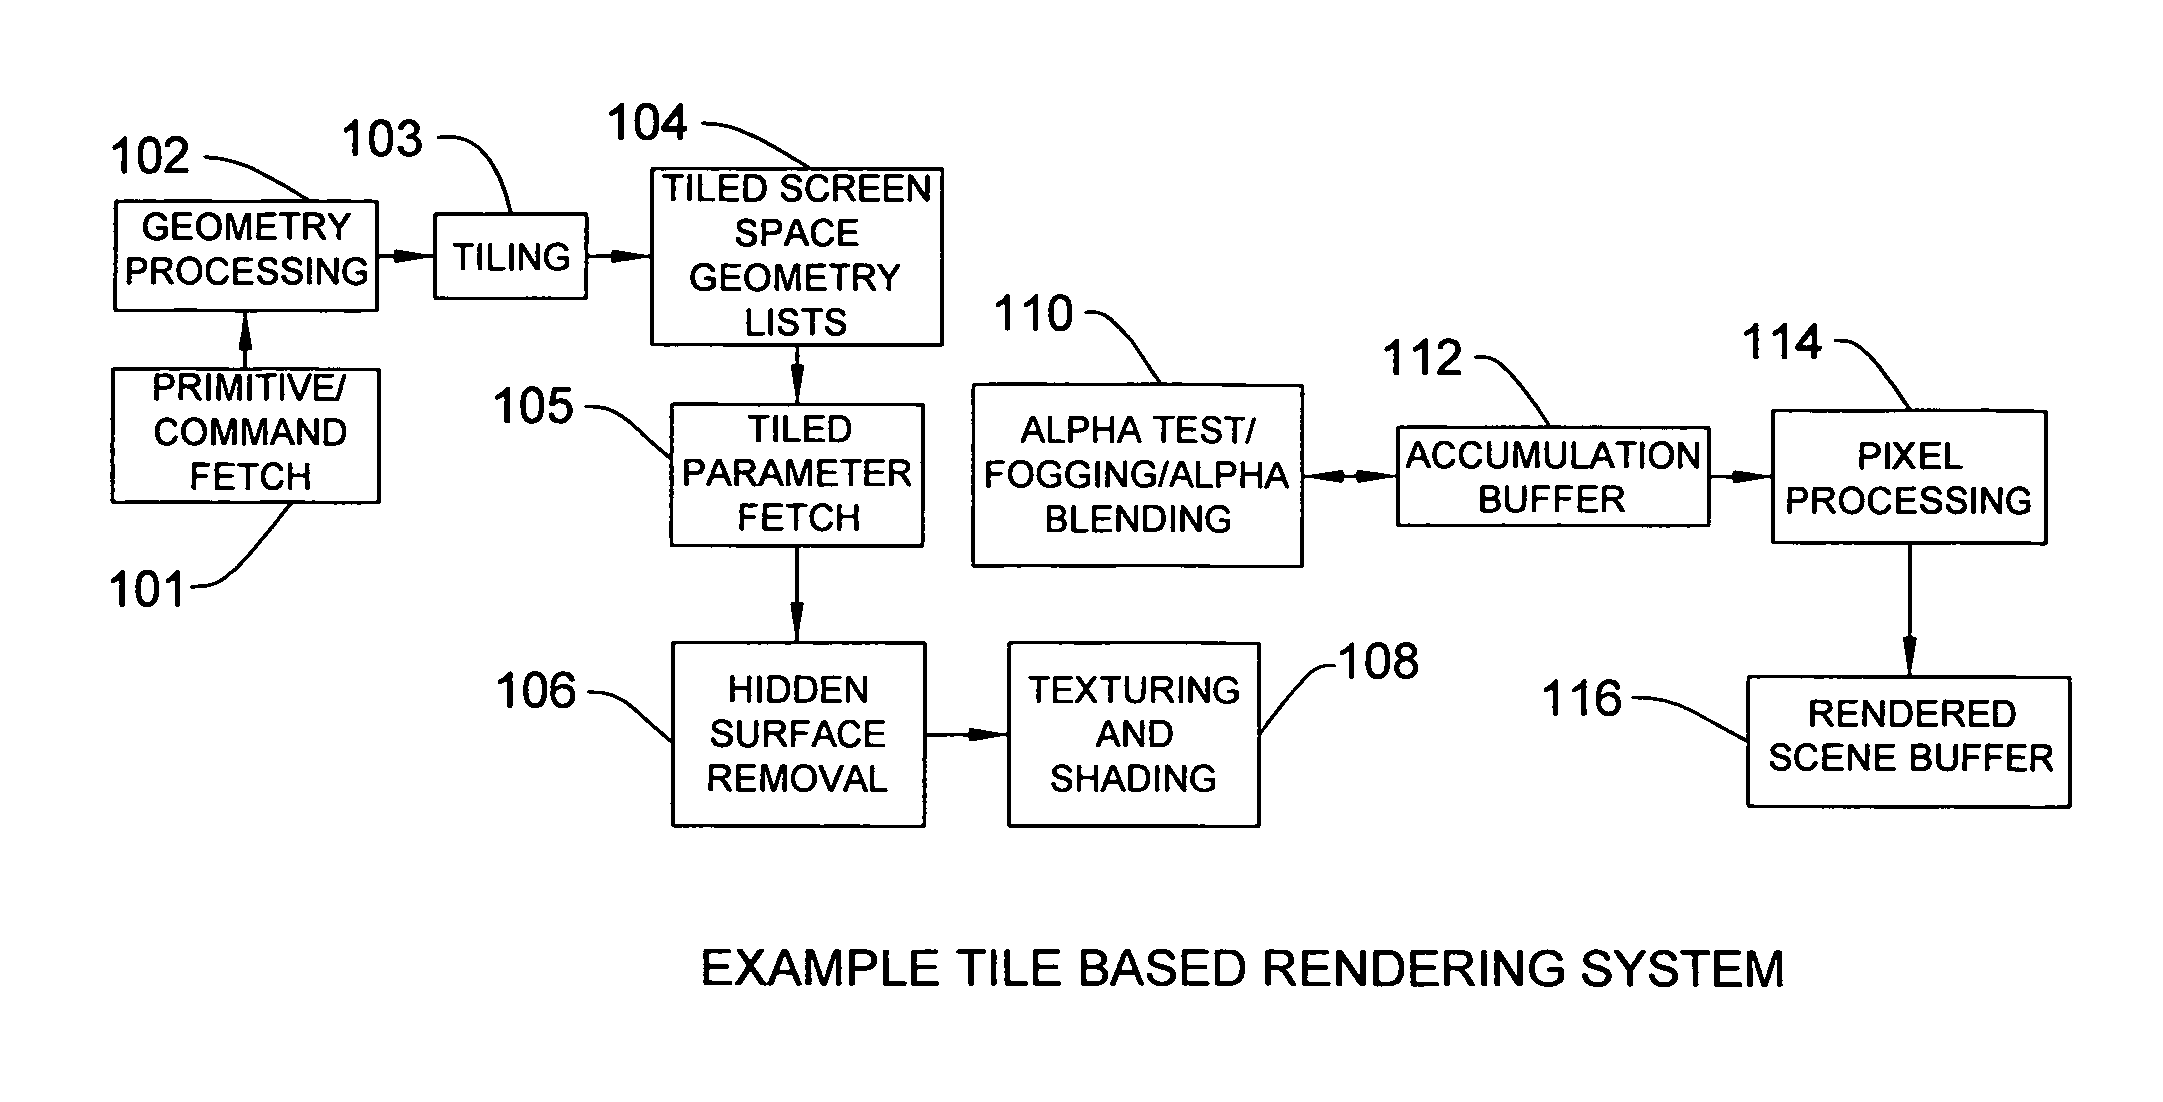 Multi-core geometry processing in a tile based rendering system